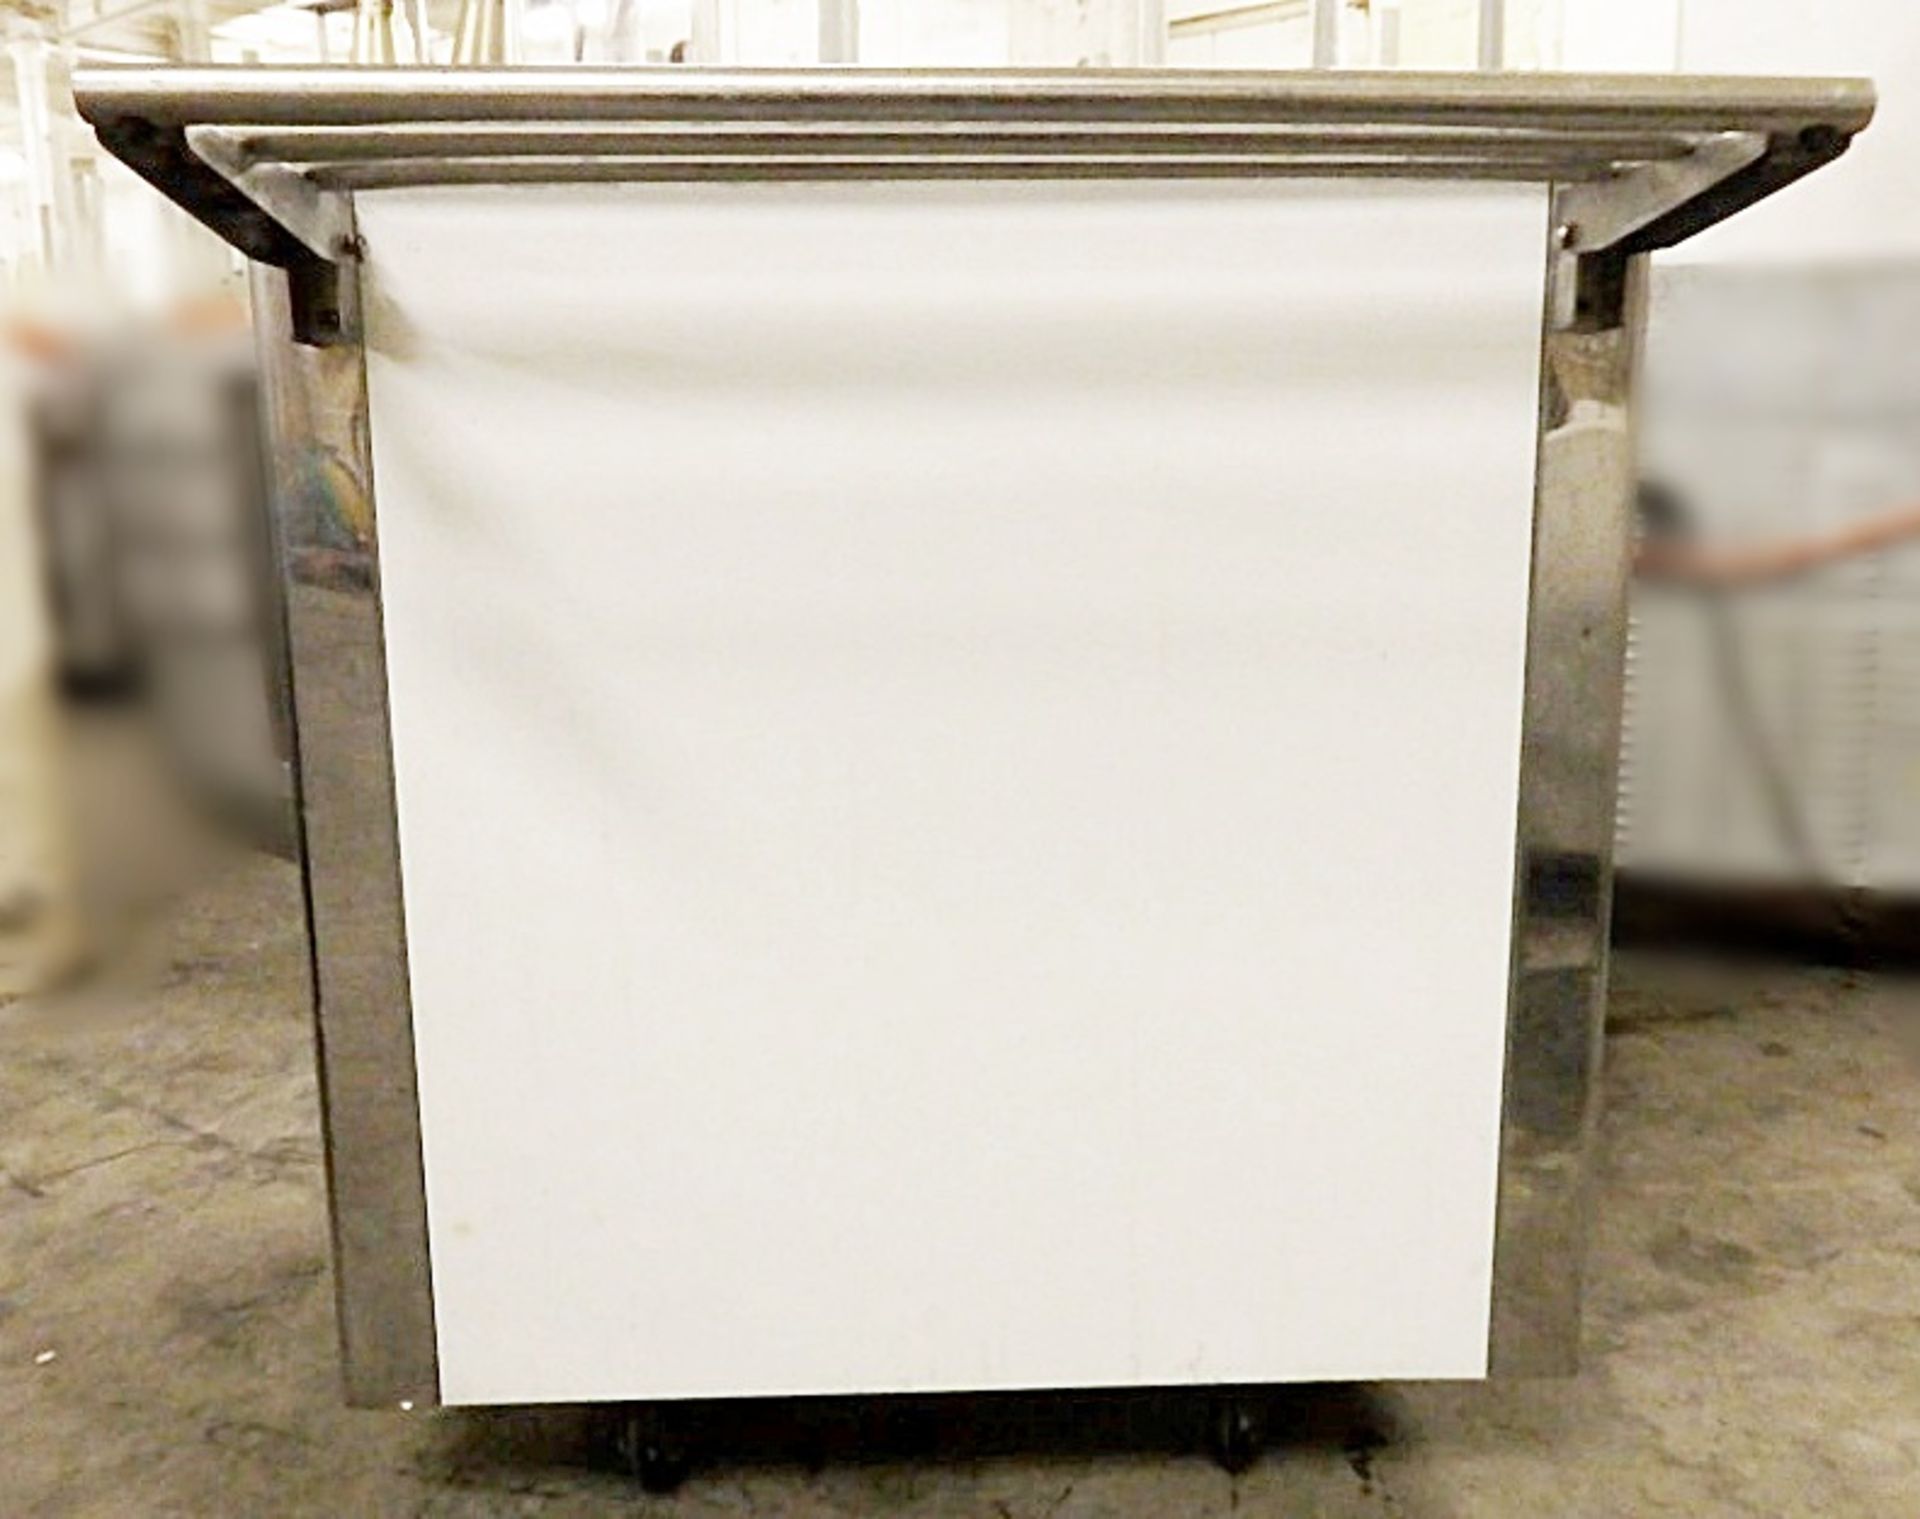 1 x Serving Counter With Storage - On Castors For Maneuverability - Ideal For Pub Carvery, Canteens, - Image 3 of 8